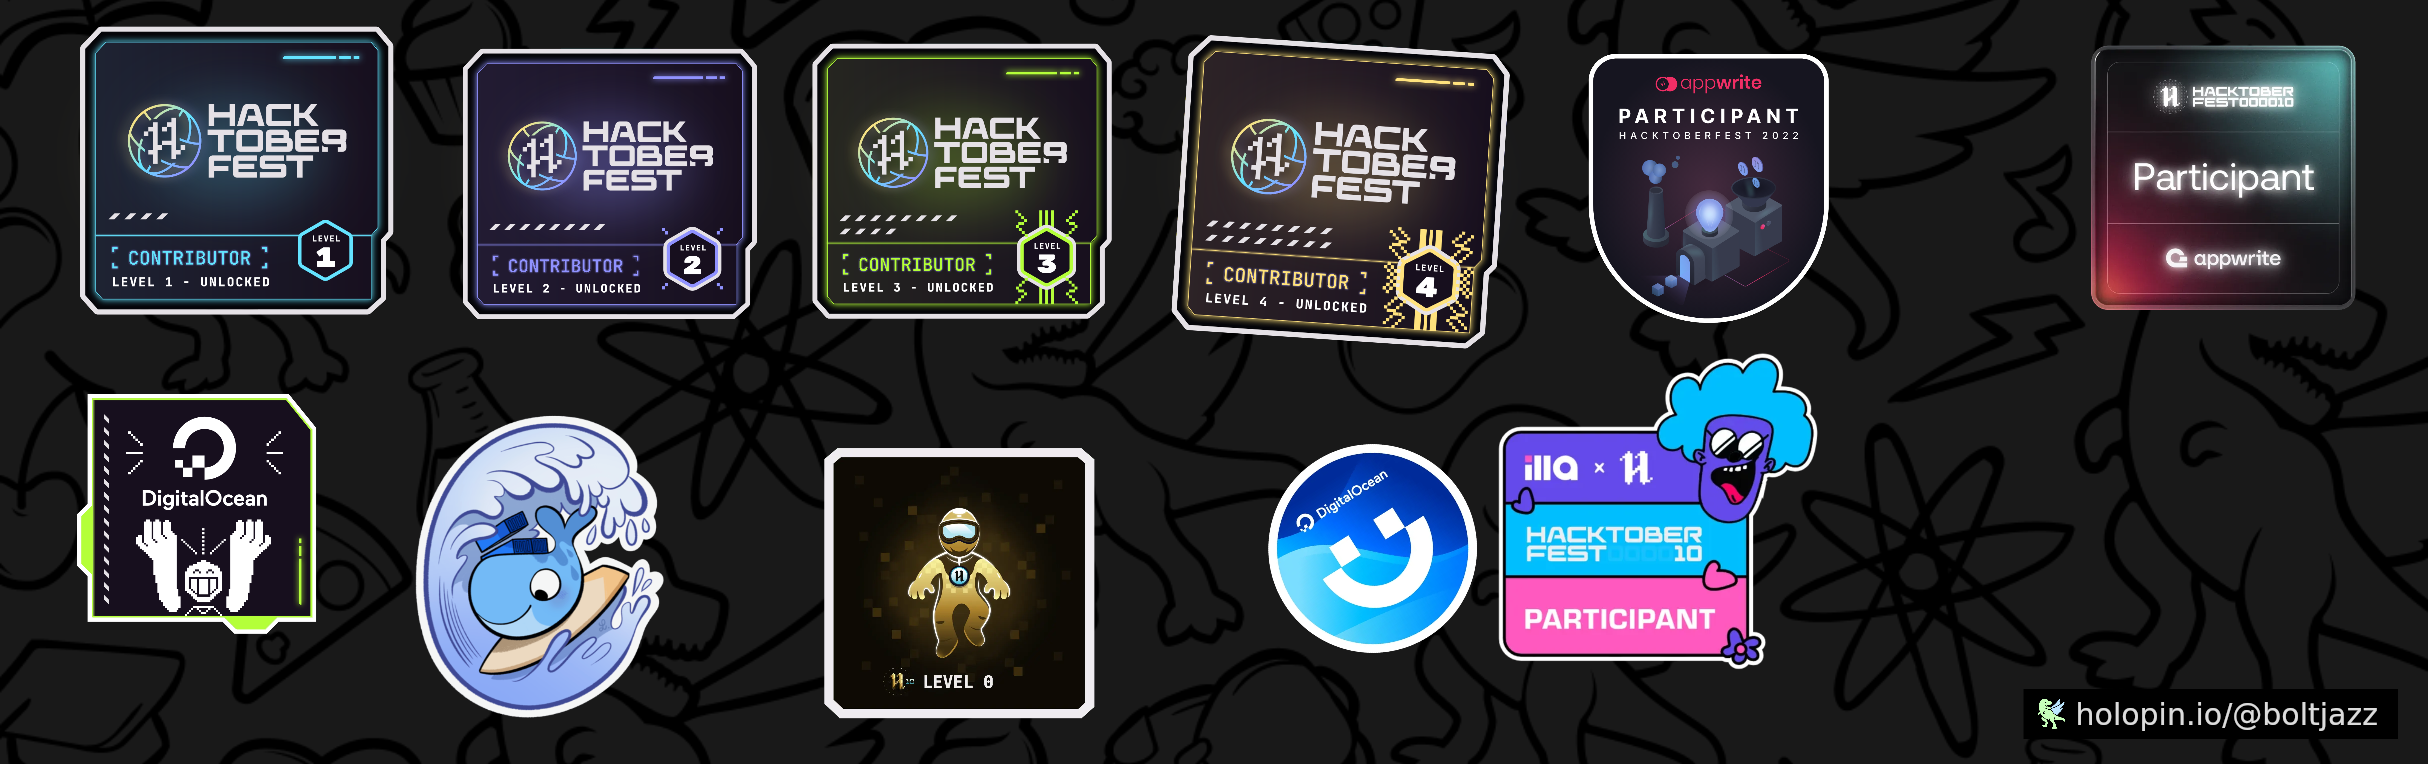 An image of @boltjazz's Holopin badges, which is a link to view their full Holopin profile